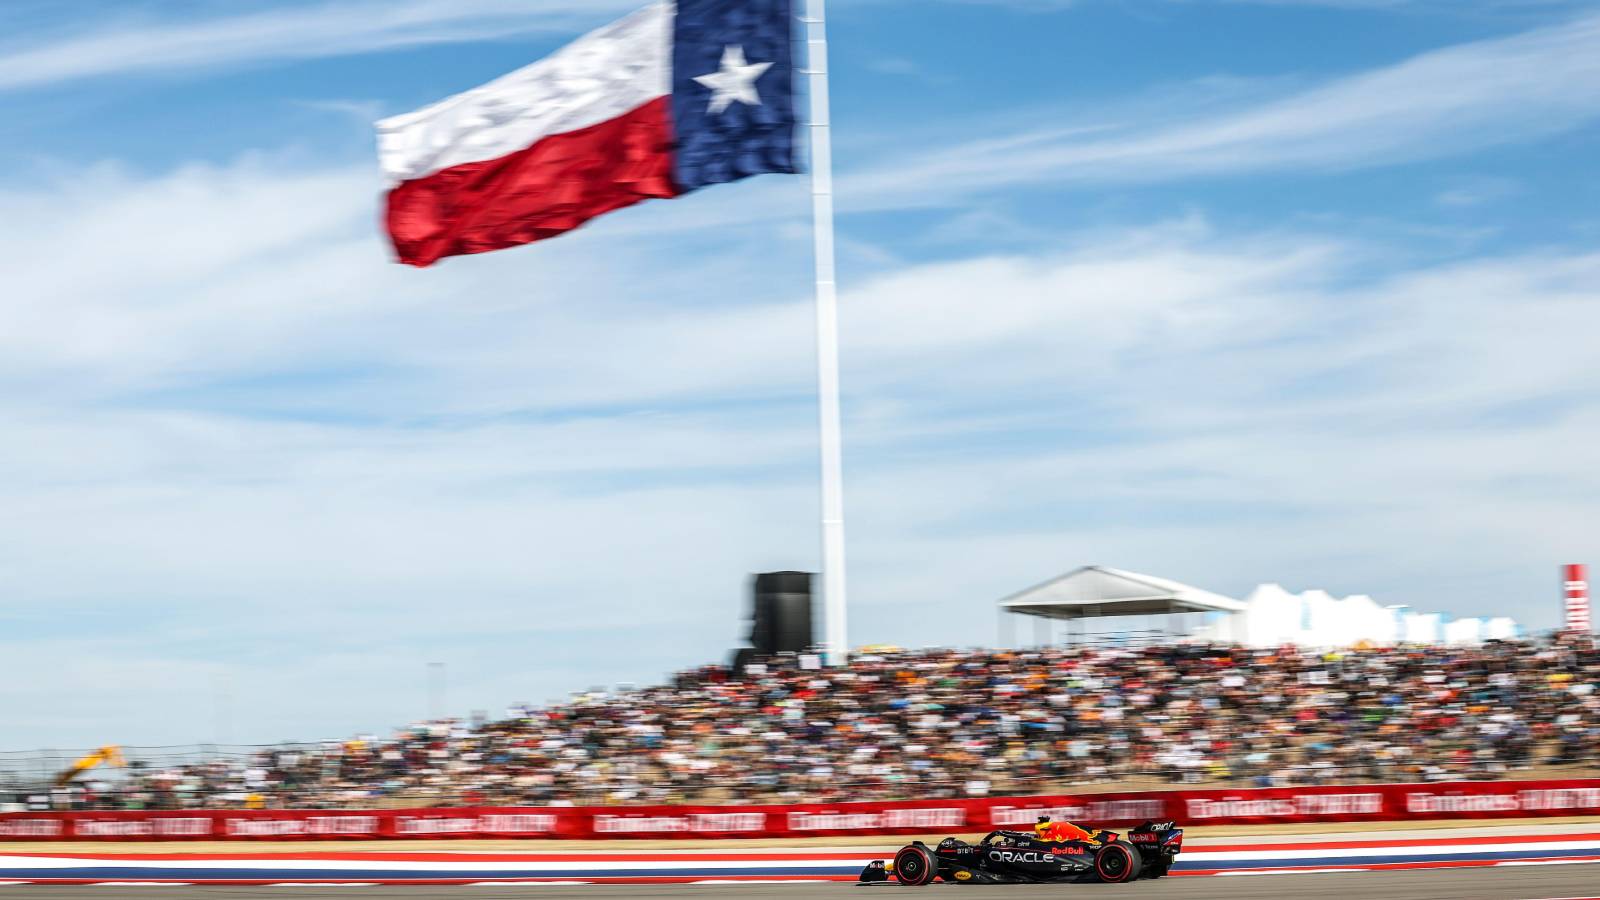 Max Verstappen's Red Bull in front of Lone Star flag at the US GP. Austin October 2022.